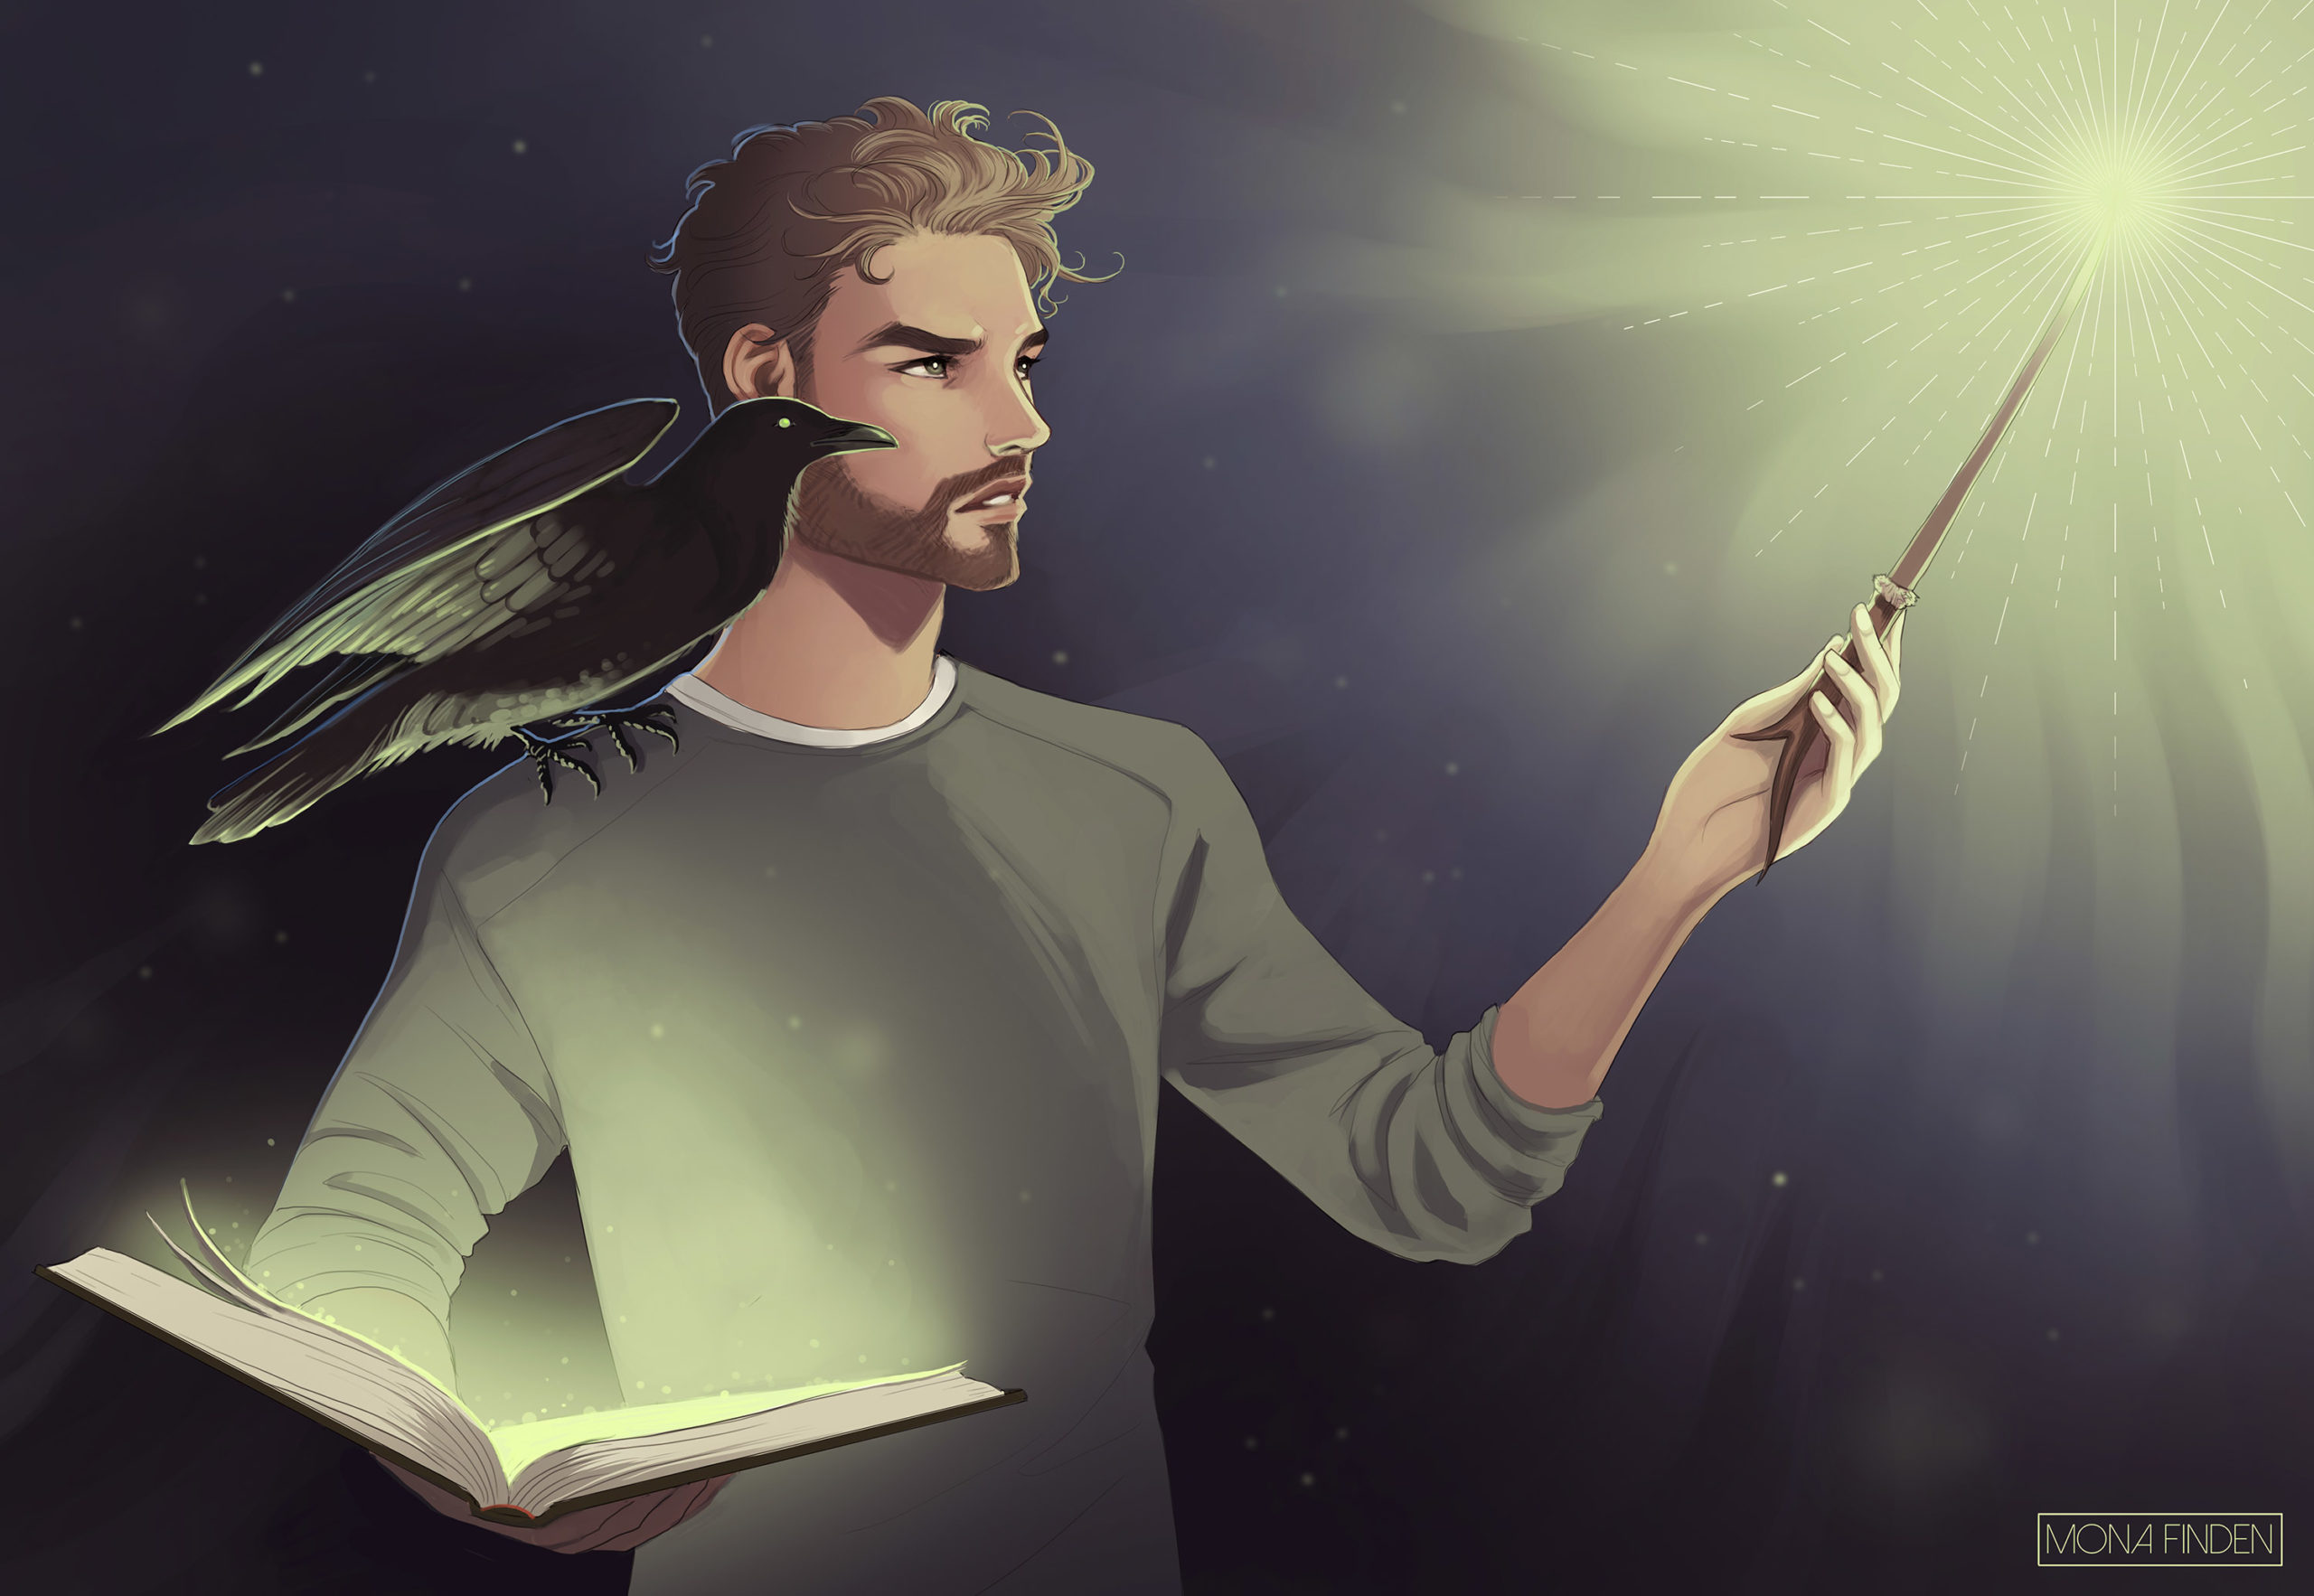 Laurence using magic by Mona Finden